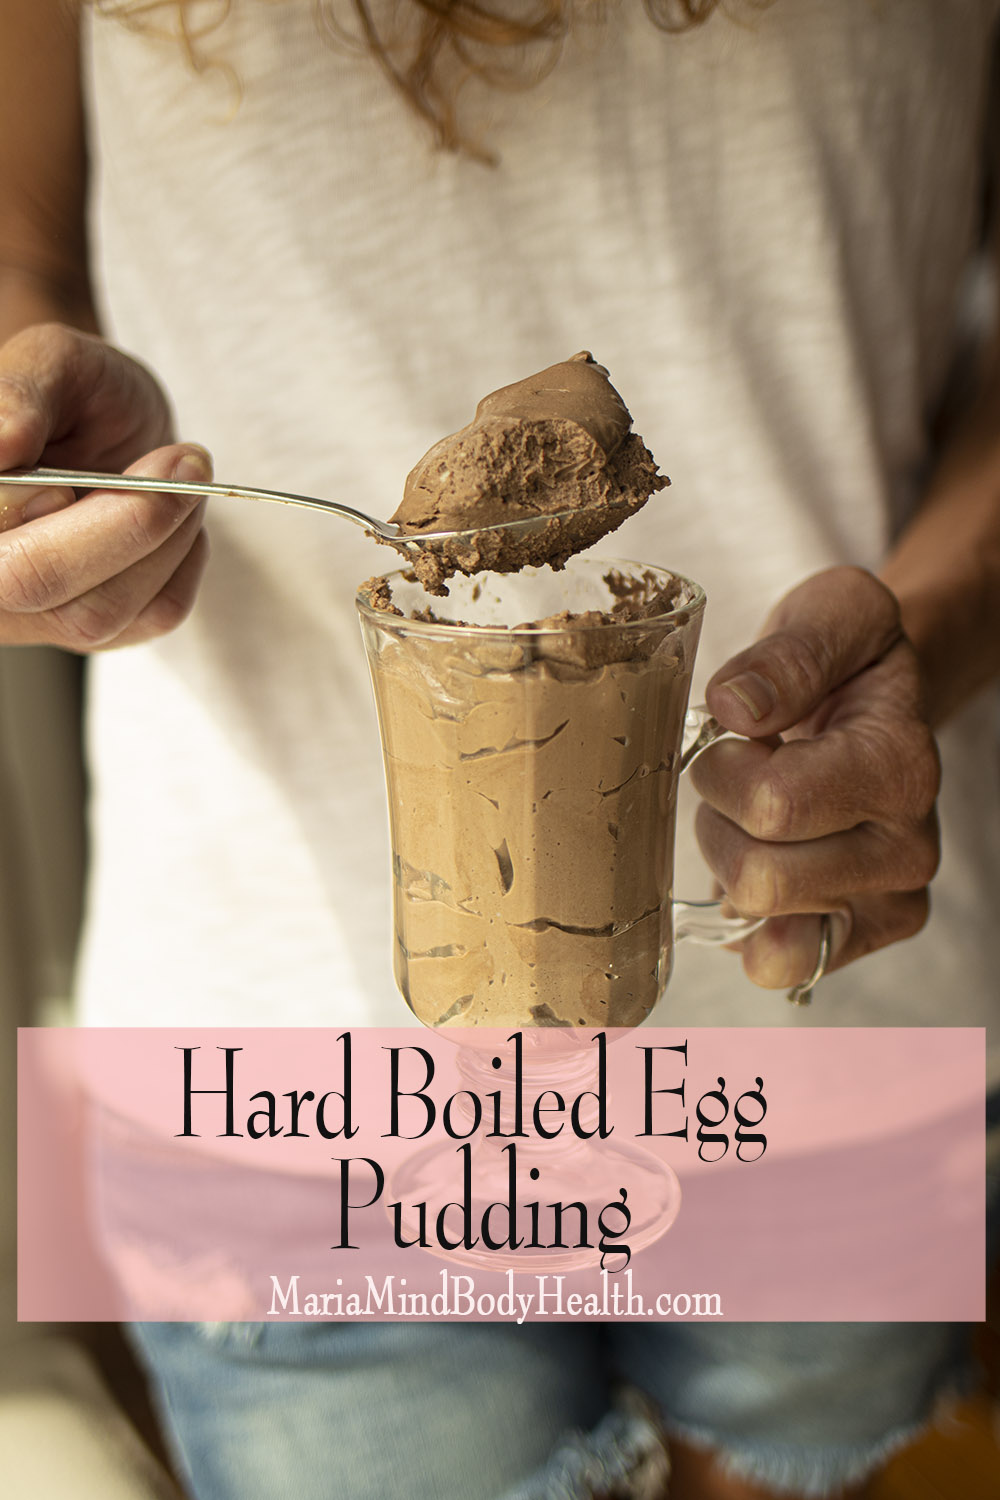 The Life of Jennifer Dawn: Old Fashioned Homemade Chocolate Pudding